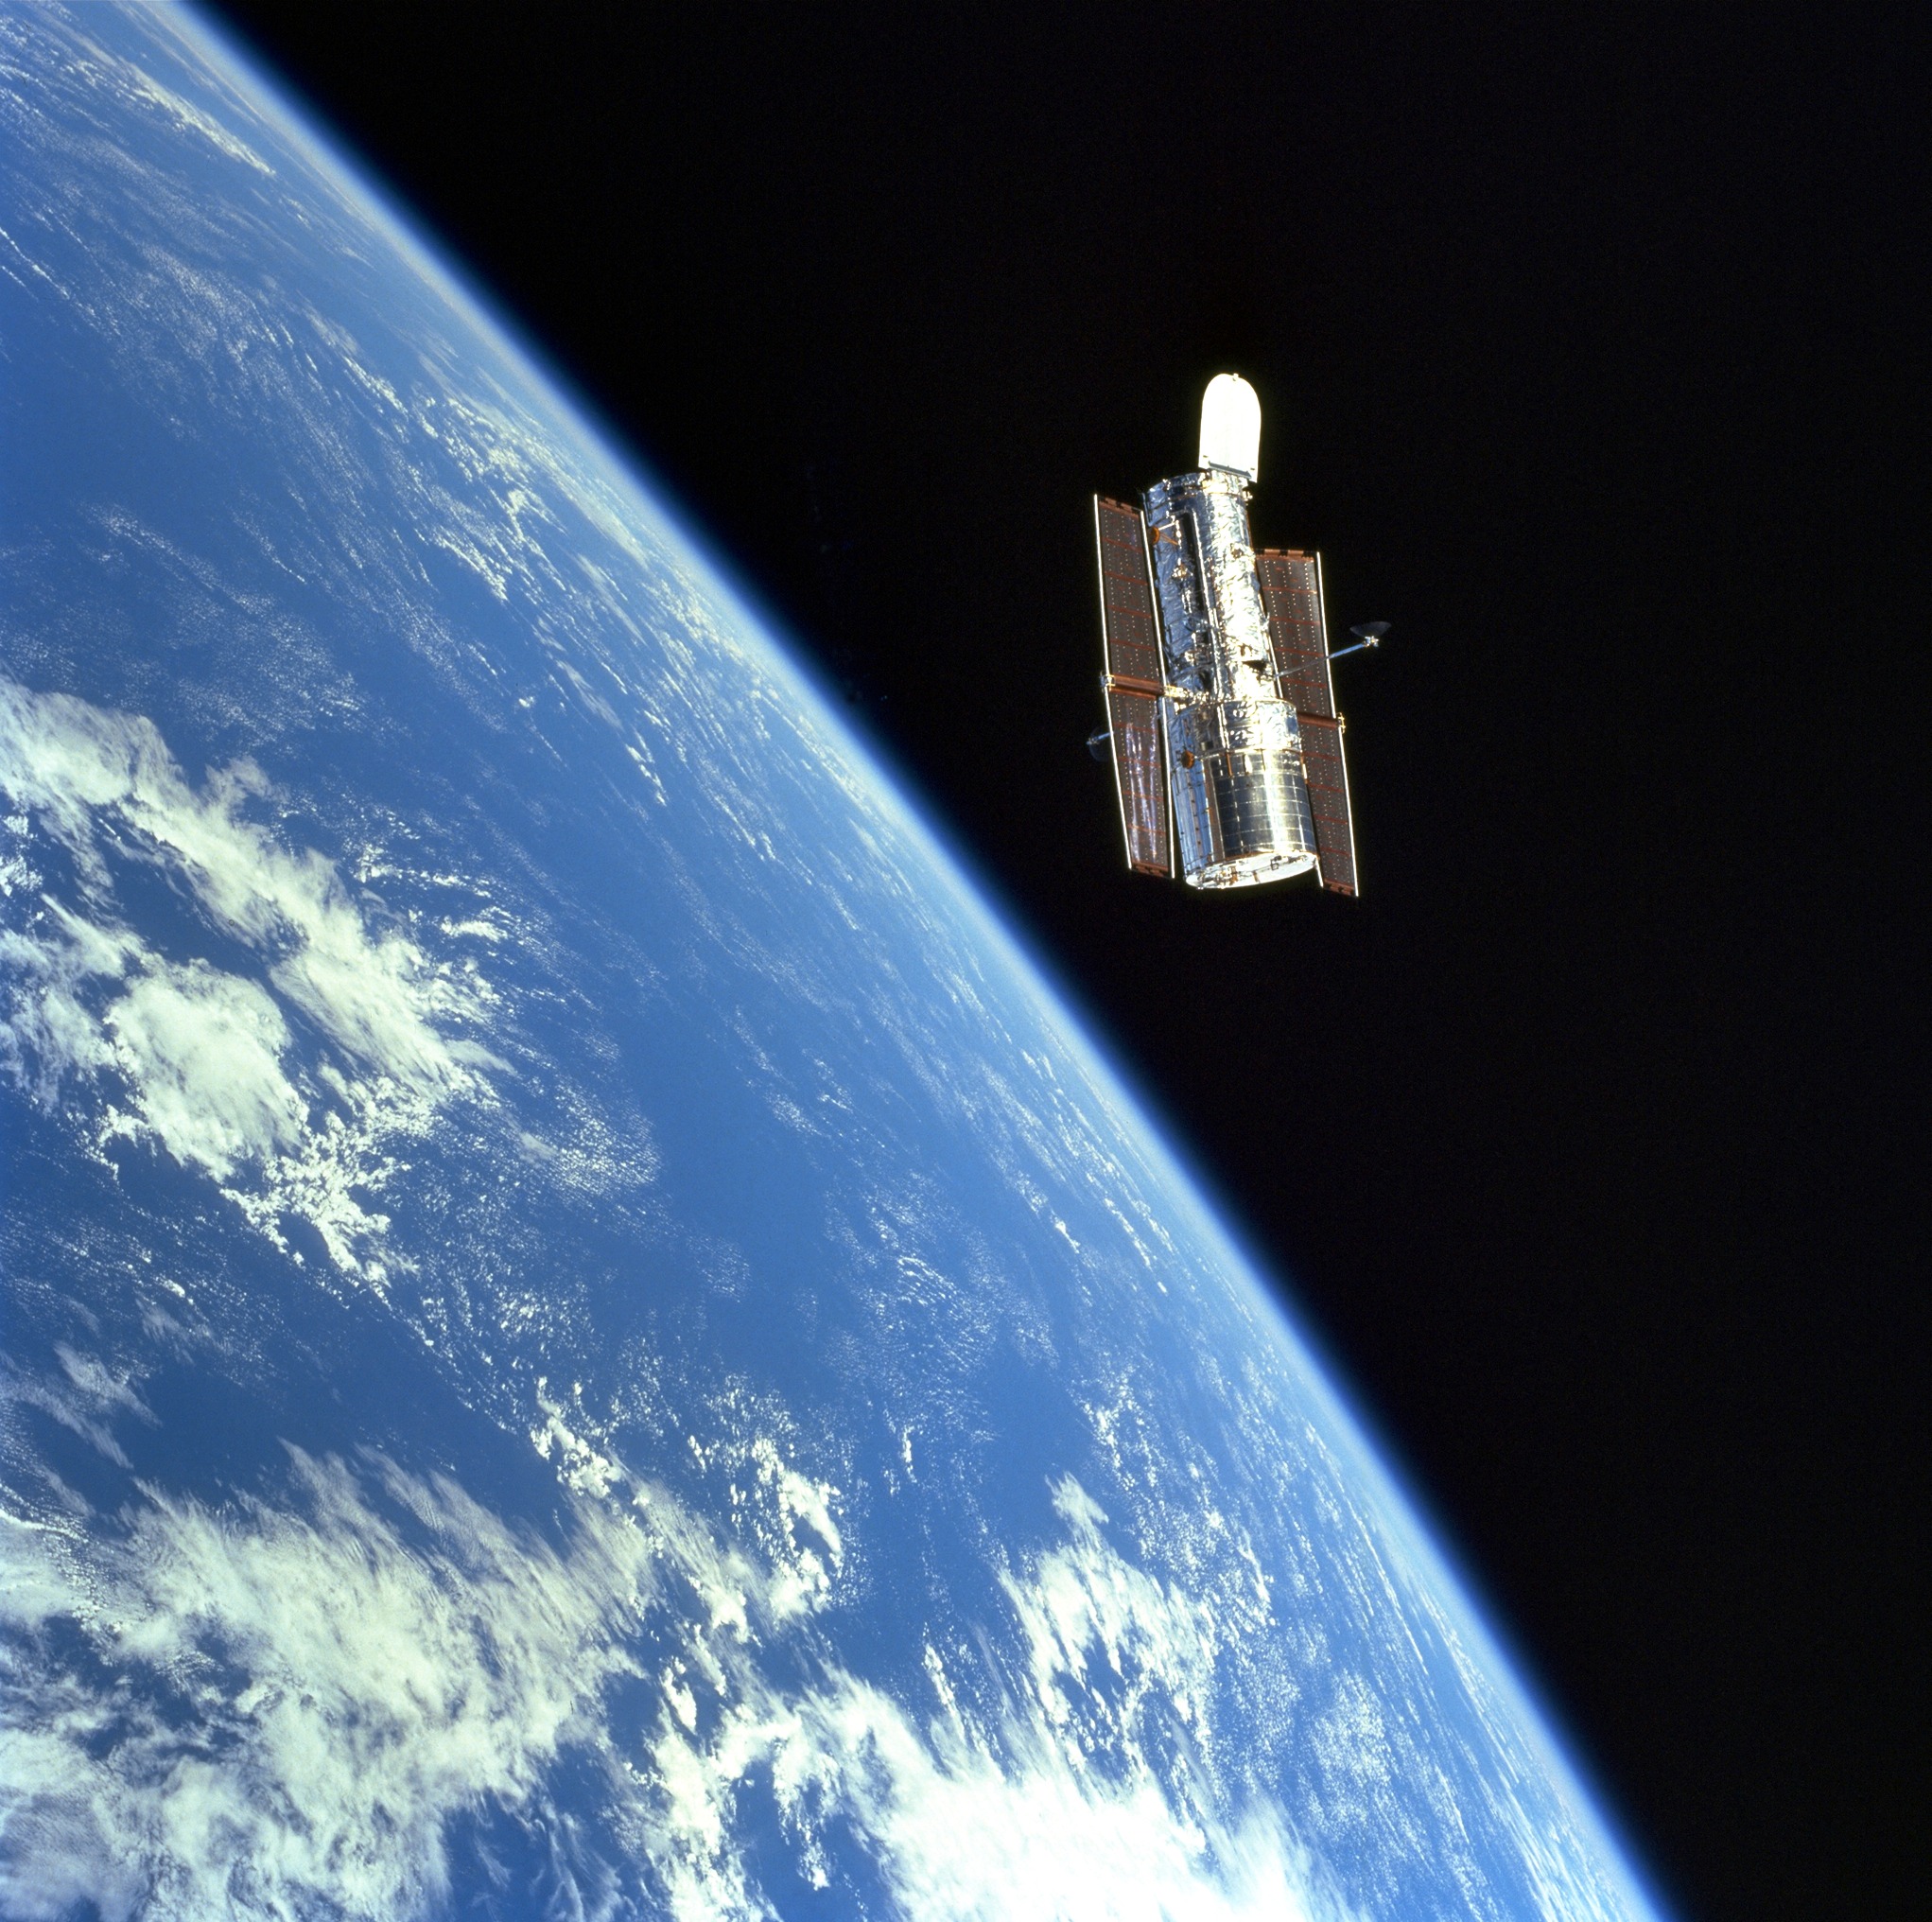 Twenty-five years after its April 1990 launch, the iconic Hubble Space Telescope remains functional. Photo Credit: NASA